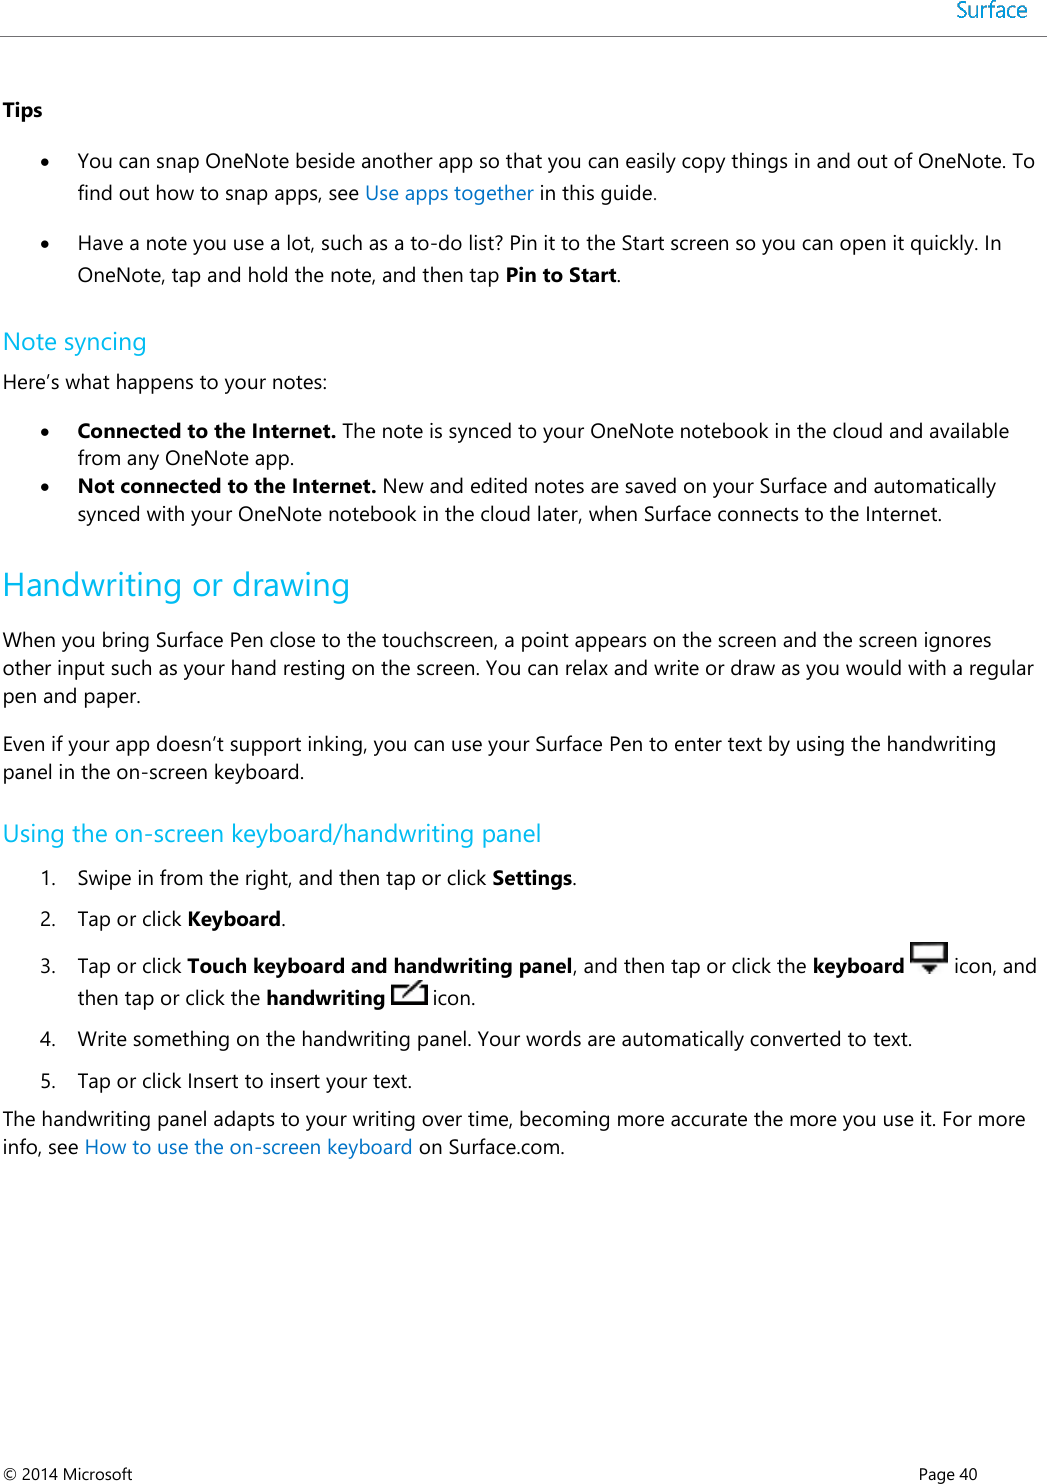  © 2014 Microsoft      Page 40  Tips  You can snap OneNote beside another app so that you can easily copy things in and out of OneNote. To find out how to snap apps, see Use apps together in this guide.  Have a note you use a lot, such as a to-do list? Pin it to the Start screen so you can open it quickly. In OneNote, tap and hold the note, and then tap Pin to Start. Note syncing Here’s what happens to your notes:  Connected to the Internet. The note is synced to your OneNote notebook in the cloud and available from any OneNote app.  Not connected to the Internet. New and edited notes are saved on your Surface and automatically synced with your OneNote notebook in the cloud later, when Surface connects to the Internet. Handwriting or drawing When you bring Surface Pen close to the touchscreen, a point appears on the screen and the screen ignores other input such as your hand resting on the screen. You can relax and write or draw as you would with a regular pen and paper.  Even if your app doesn’t support inking, you can use your Surface Pen to enter text by using the handwriting panel in the on-screen keyboard. Using the on-screen keyboard/handwriting panel 1. Swipe in from the right, and then tap or click Settings.  2. Tap or click Keyboard. 3. Tap or click Touch keyboard and handwriting panel, and then tap or click the keyboard   icon, and then tap or click the handwriting   icon.  4. Write something on the handwriting panel. Your words are automatically converted to text. 5. Tap or click Insert to insert your text.  The handwriting panel adapts to your writing over time, becoming more accurate the more you use it. For more info, see How to use the on-screen keyboard on Surface.com.    